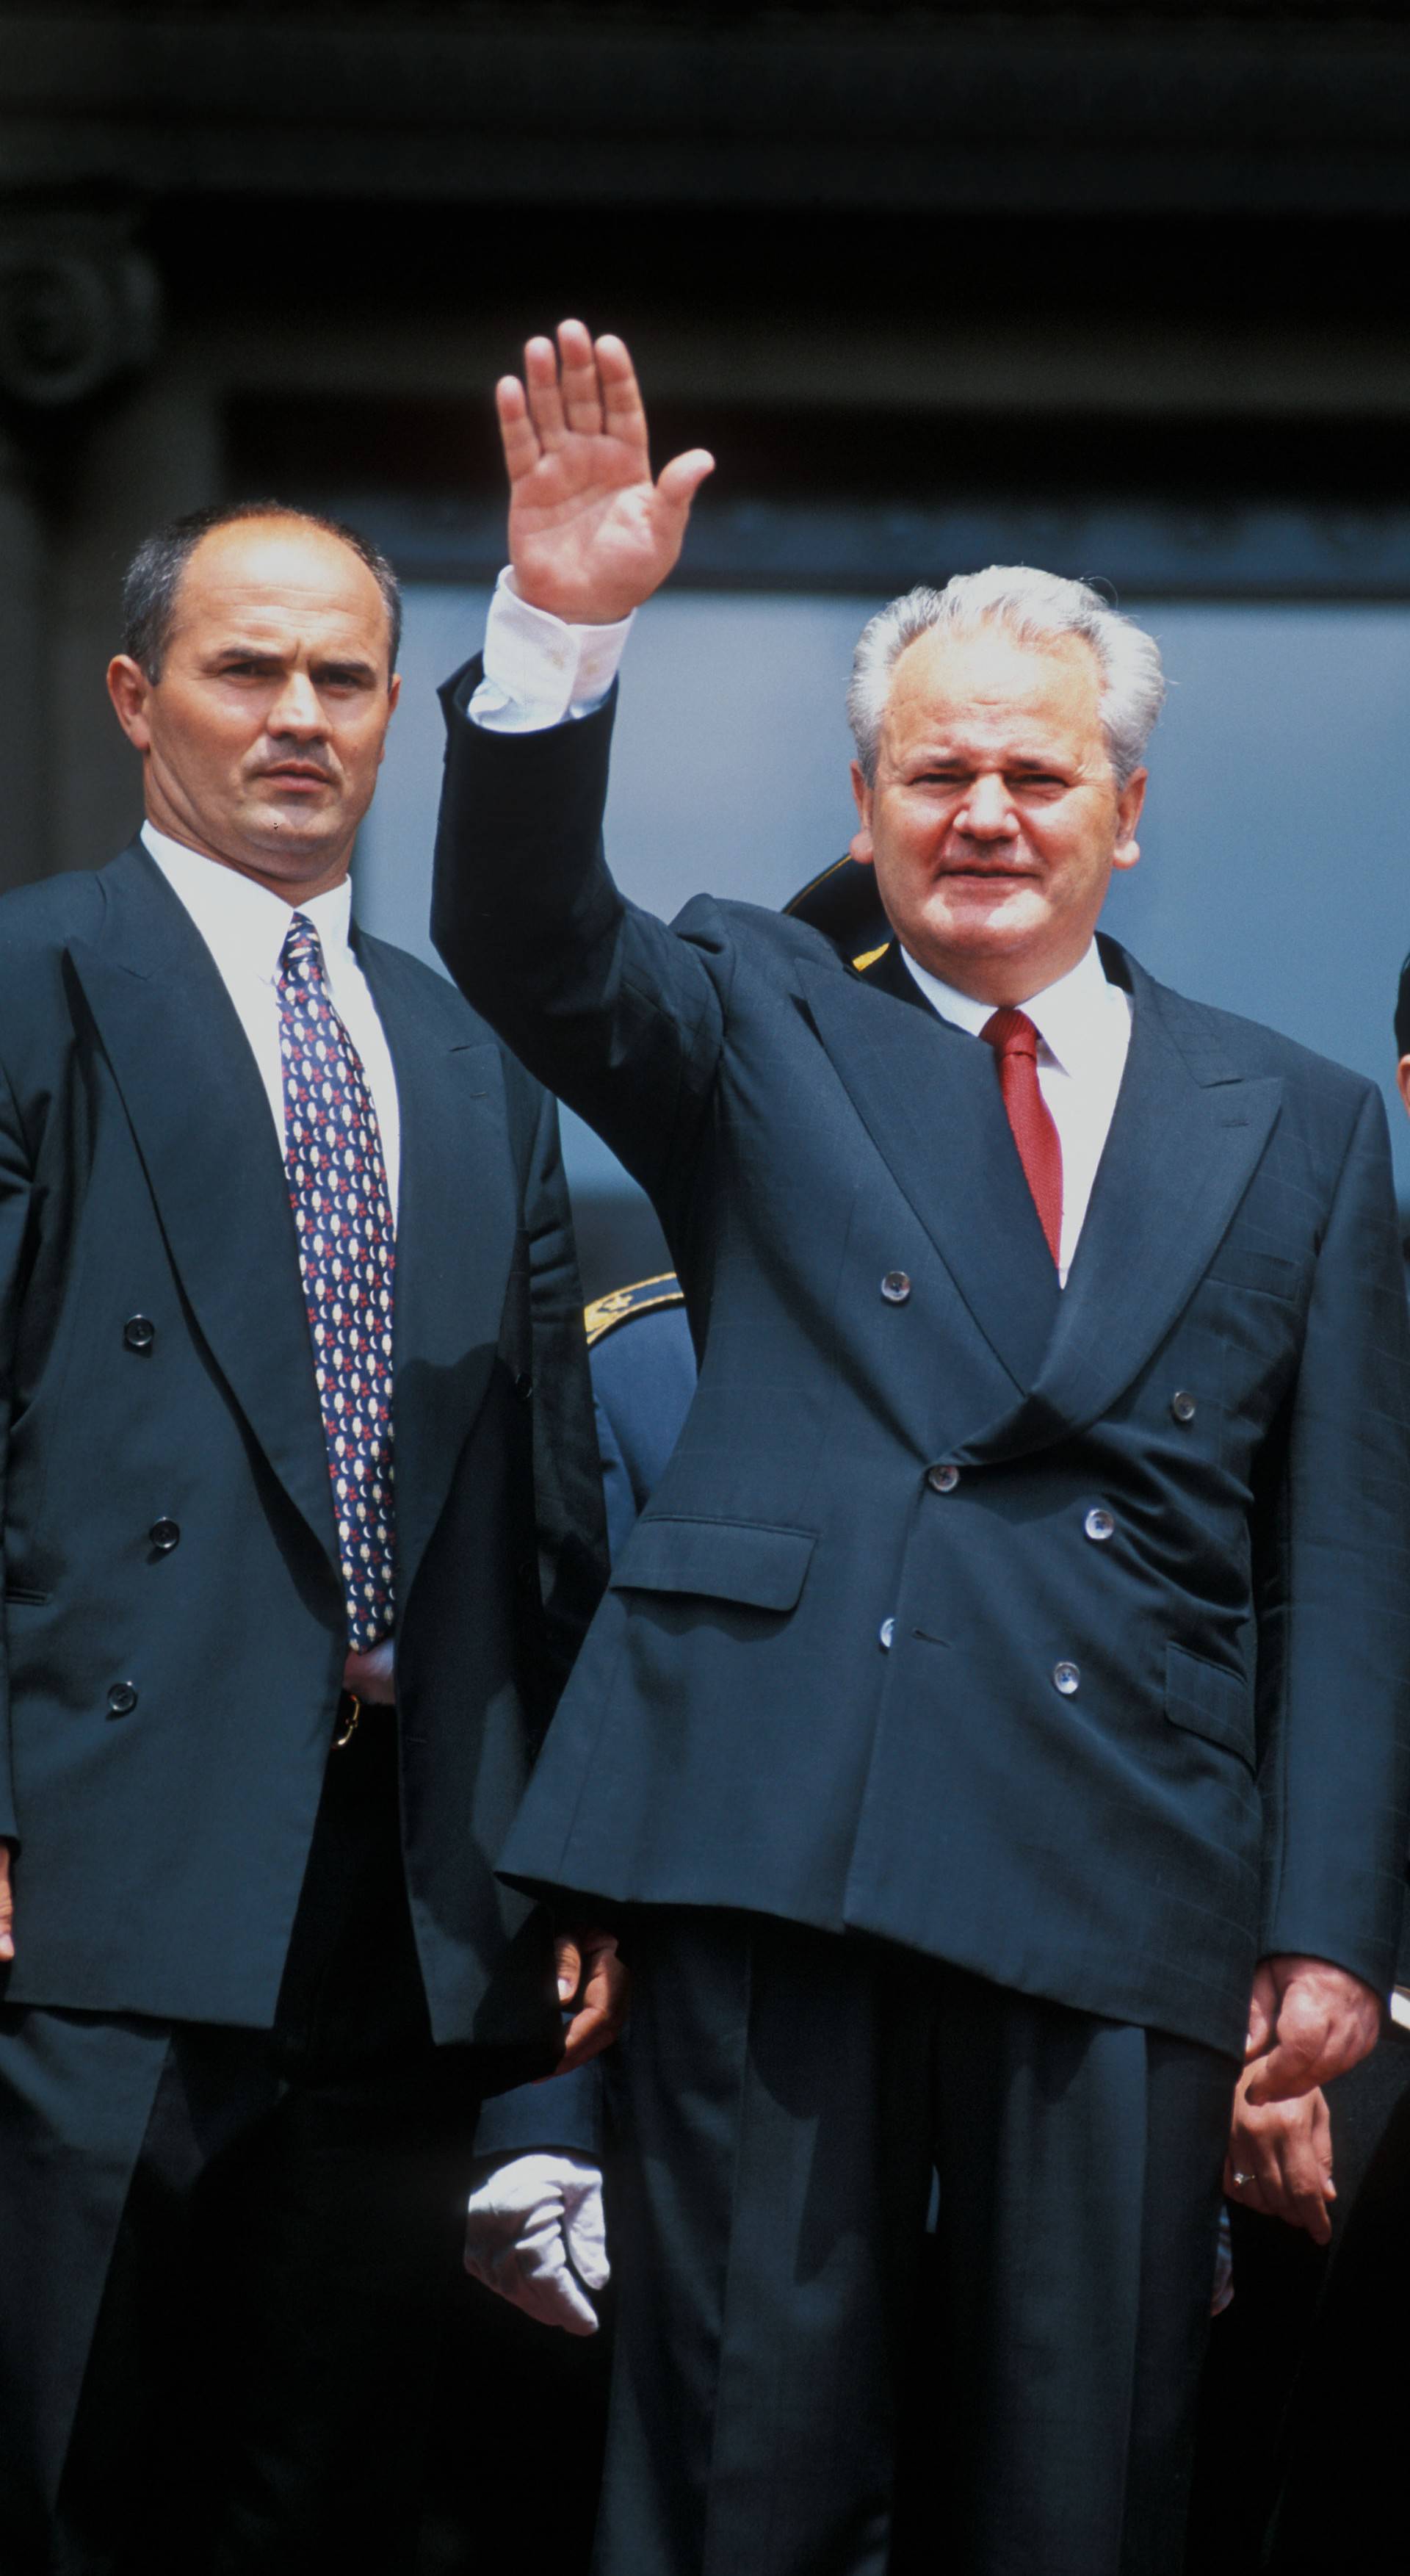 Slobodan Milosevic greets supporters shortly after his inauguration in Belgrade Serbia  on 23 July 1995